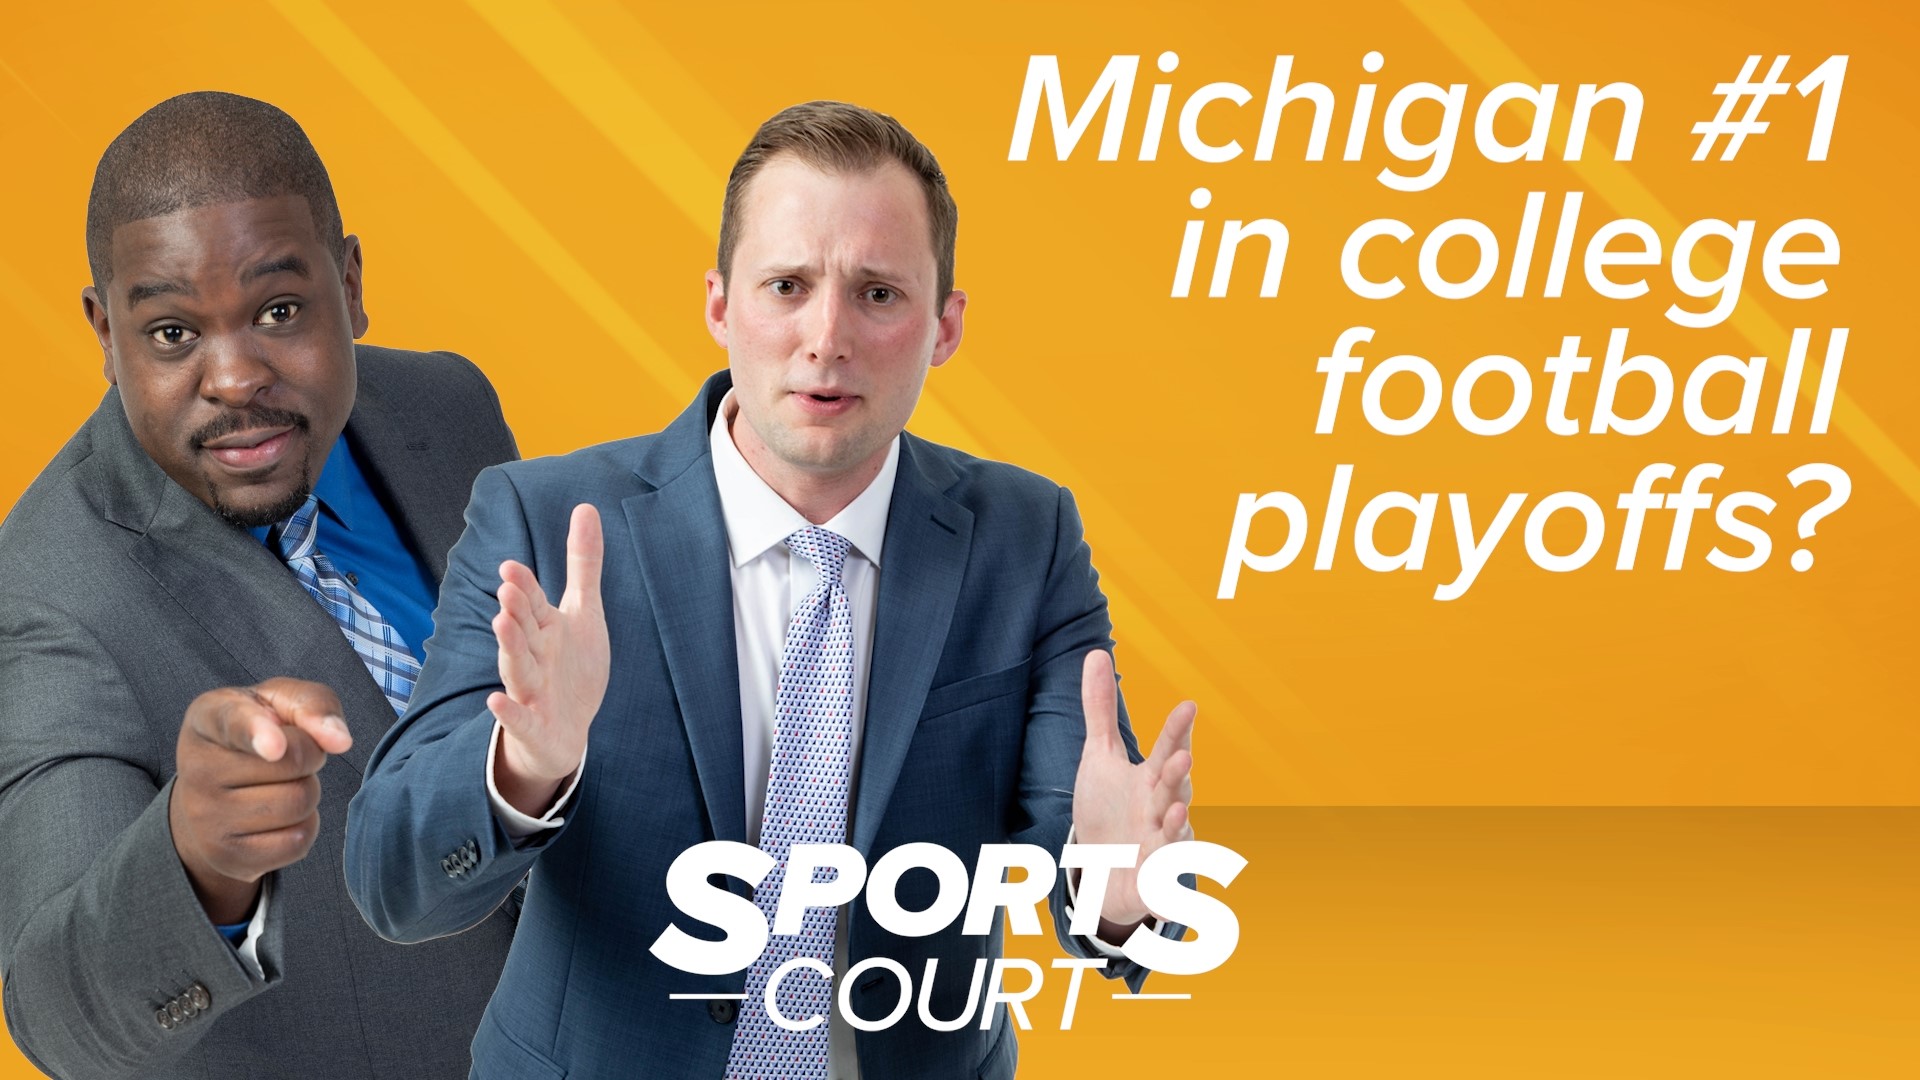 Jamal and Mark argue whether Michigan should be #1 in the country for this season's football playoff rankings.